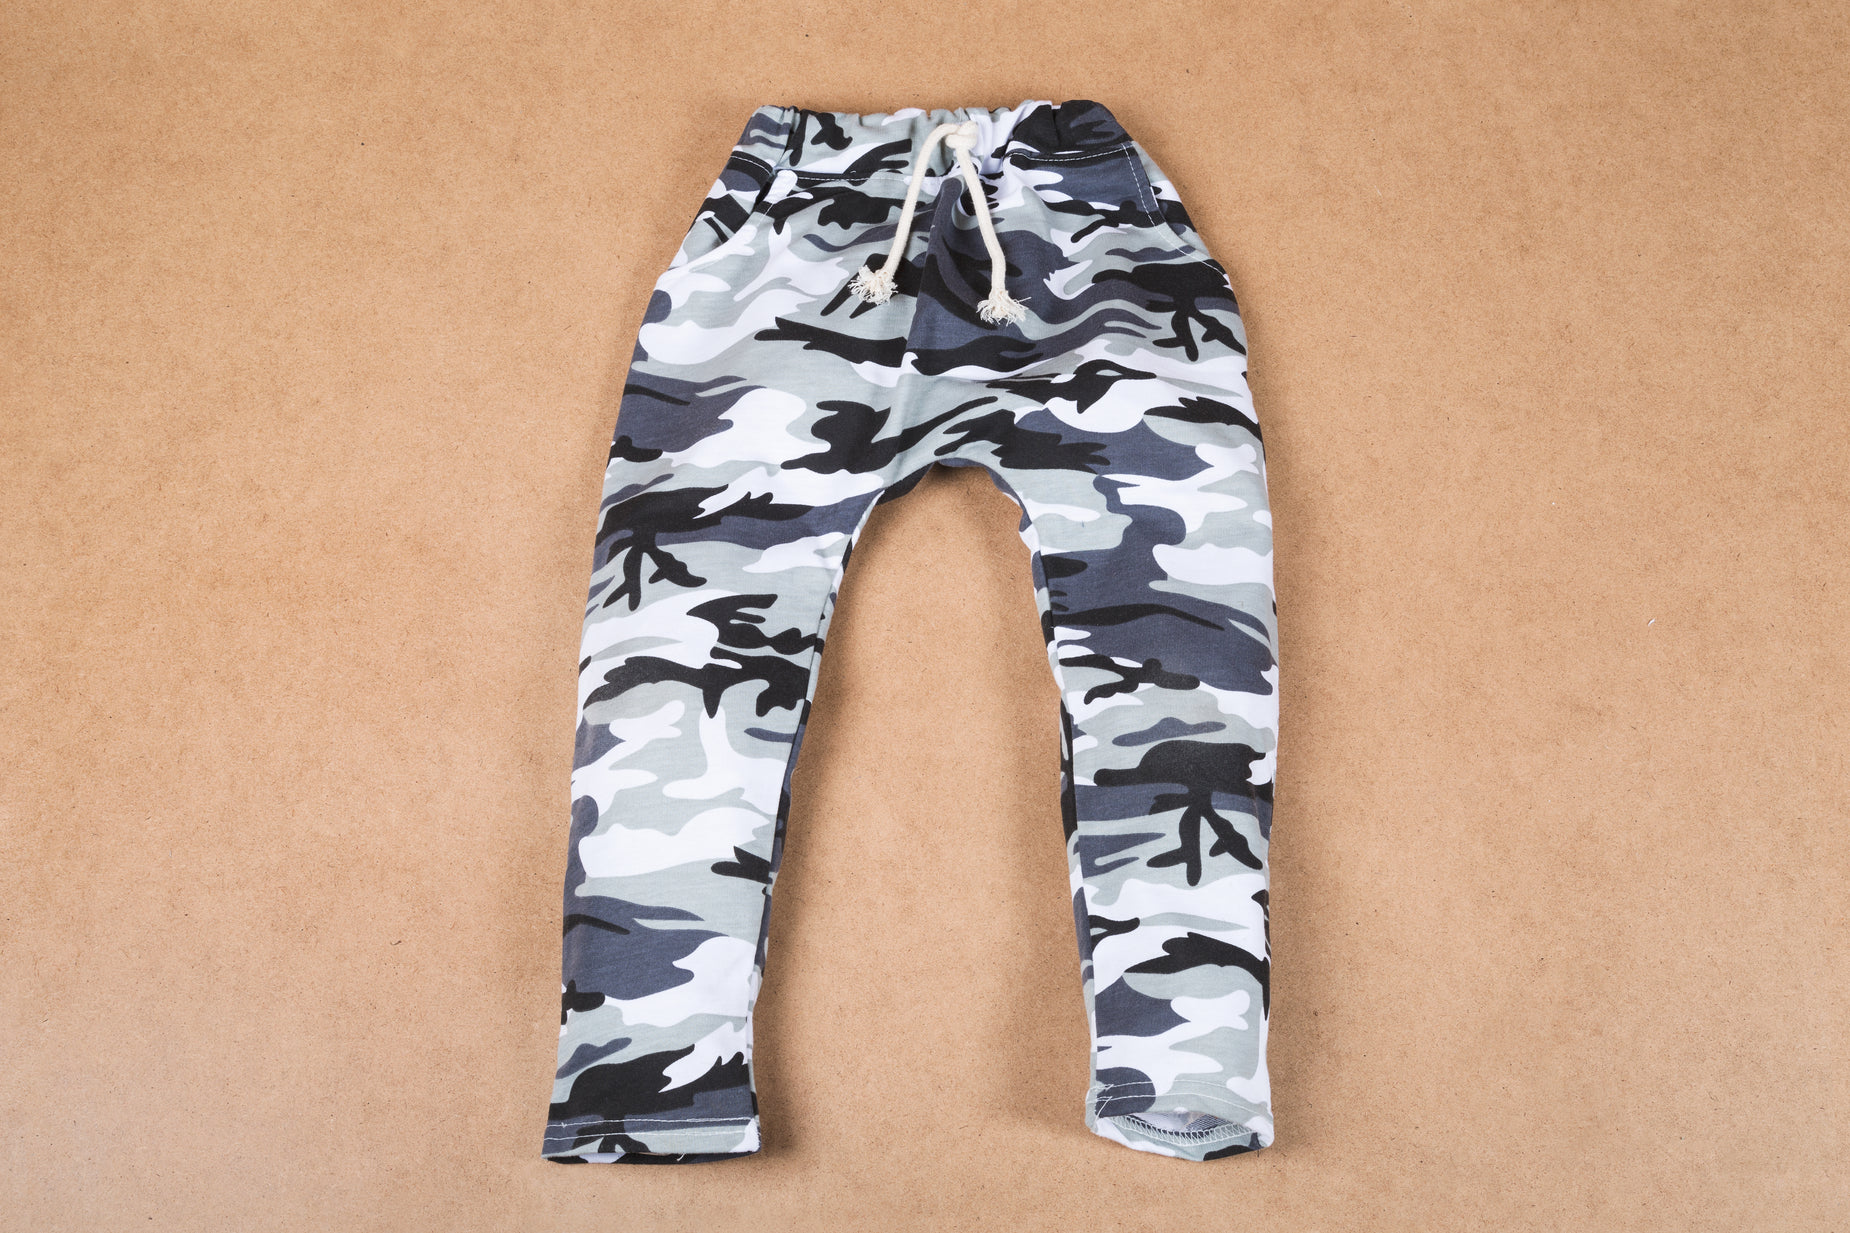 the blue camouflage pants that is sitting on top of the brown floor